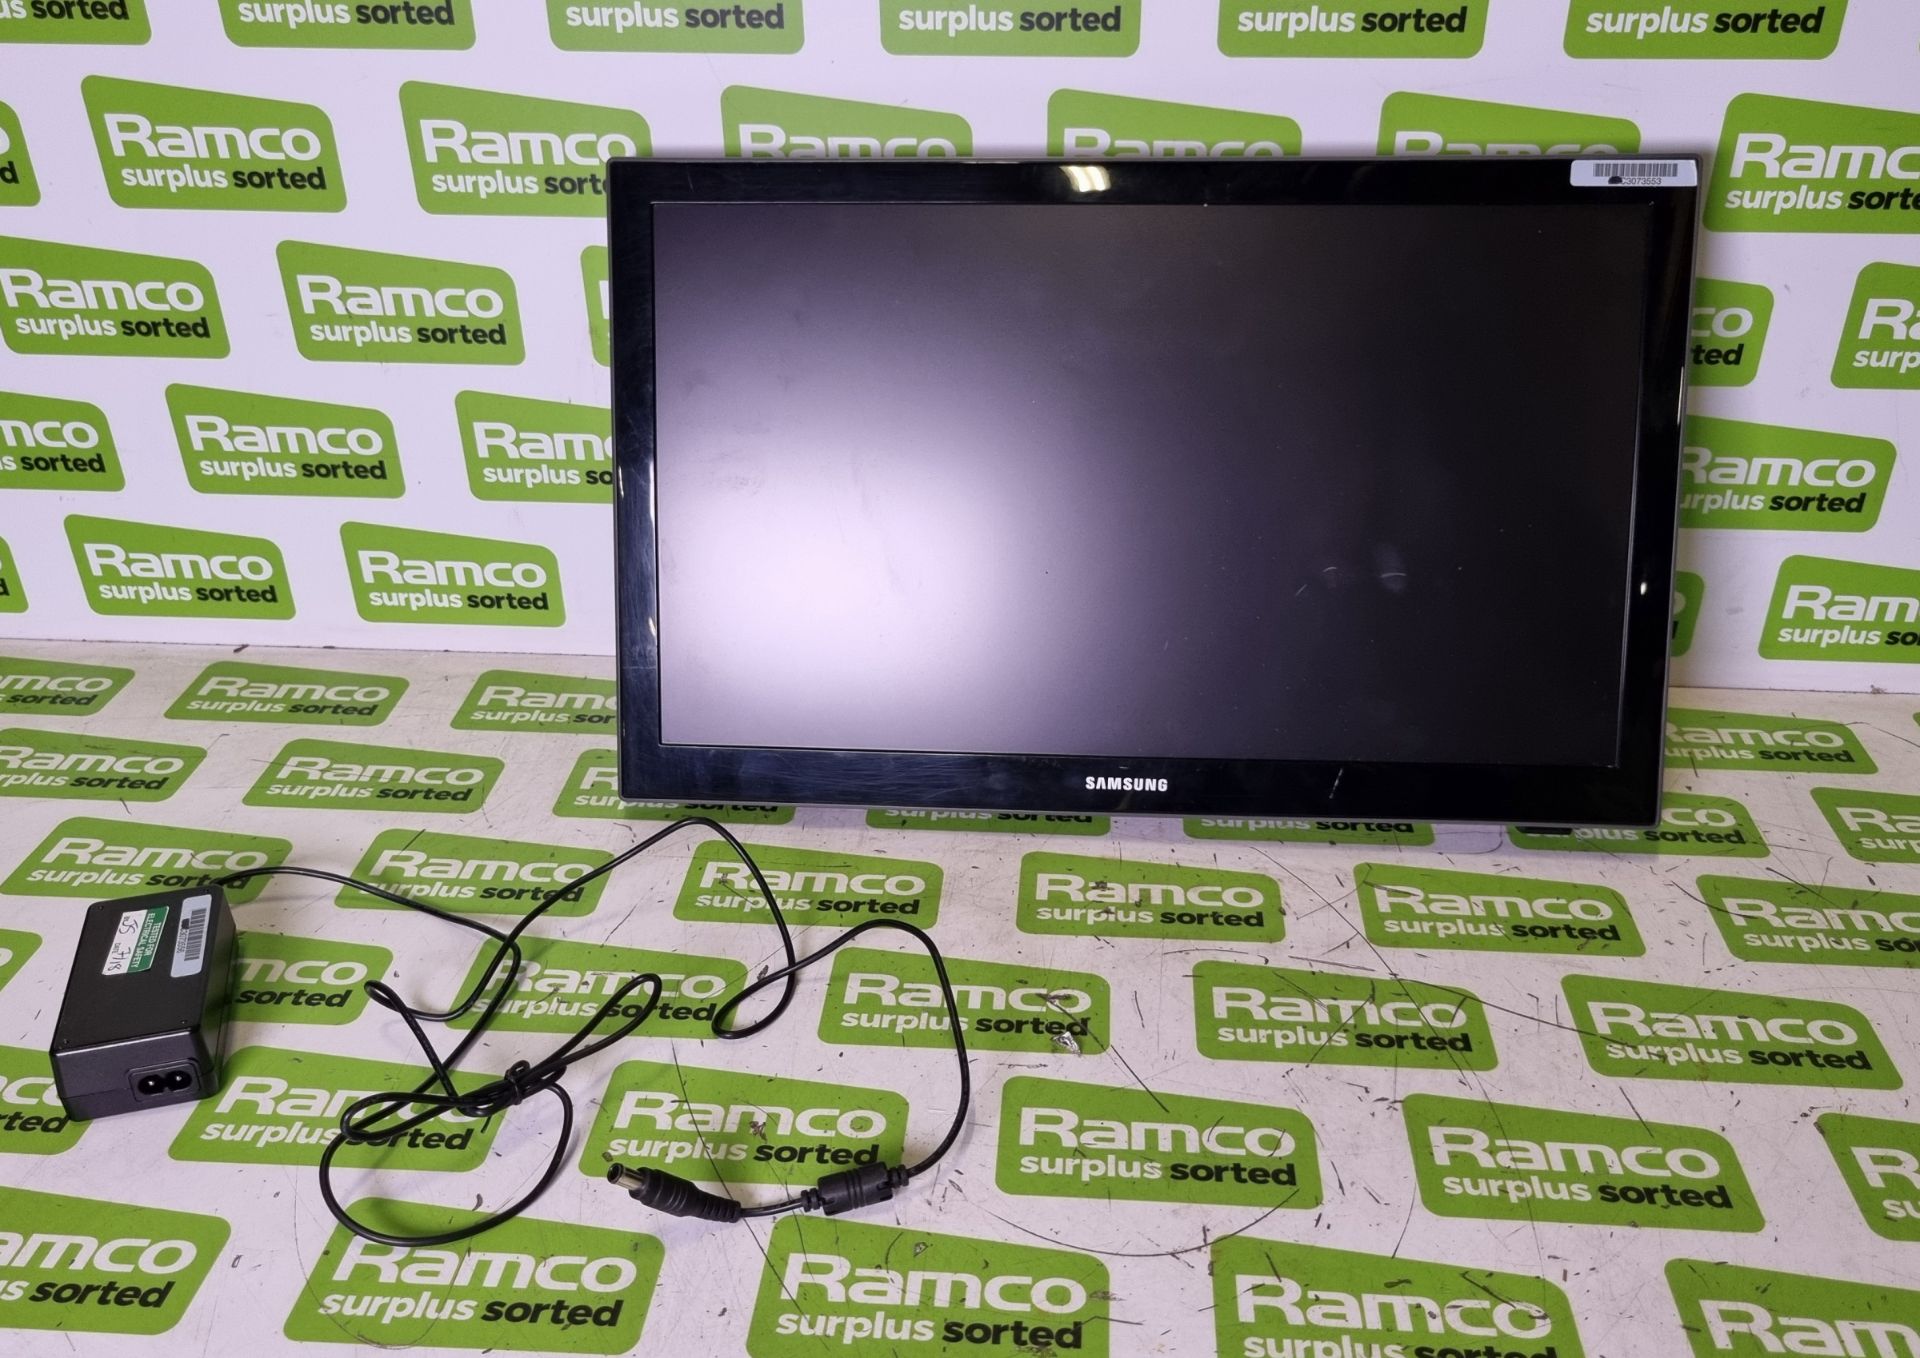 39x Samsung UE19F4000AW 19 inch TV monitors - no stand - Image 3 of 6